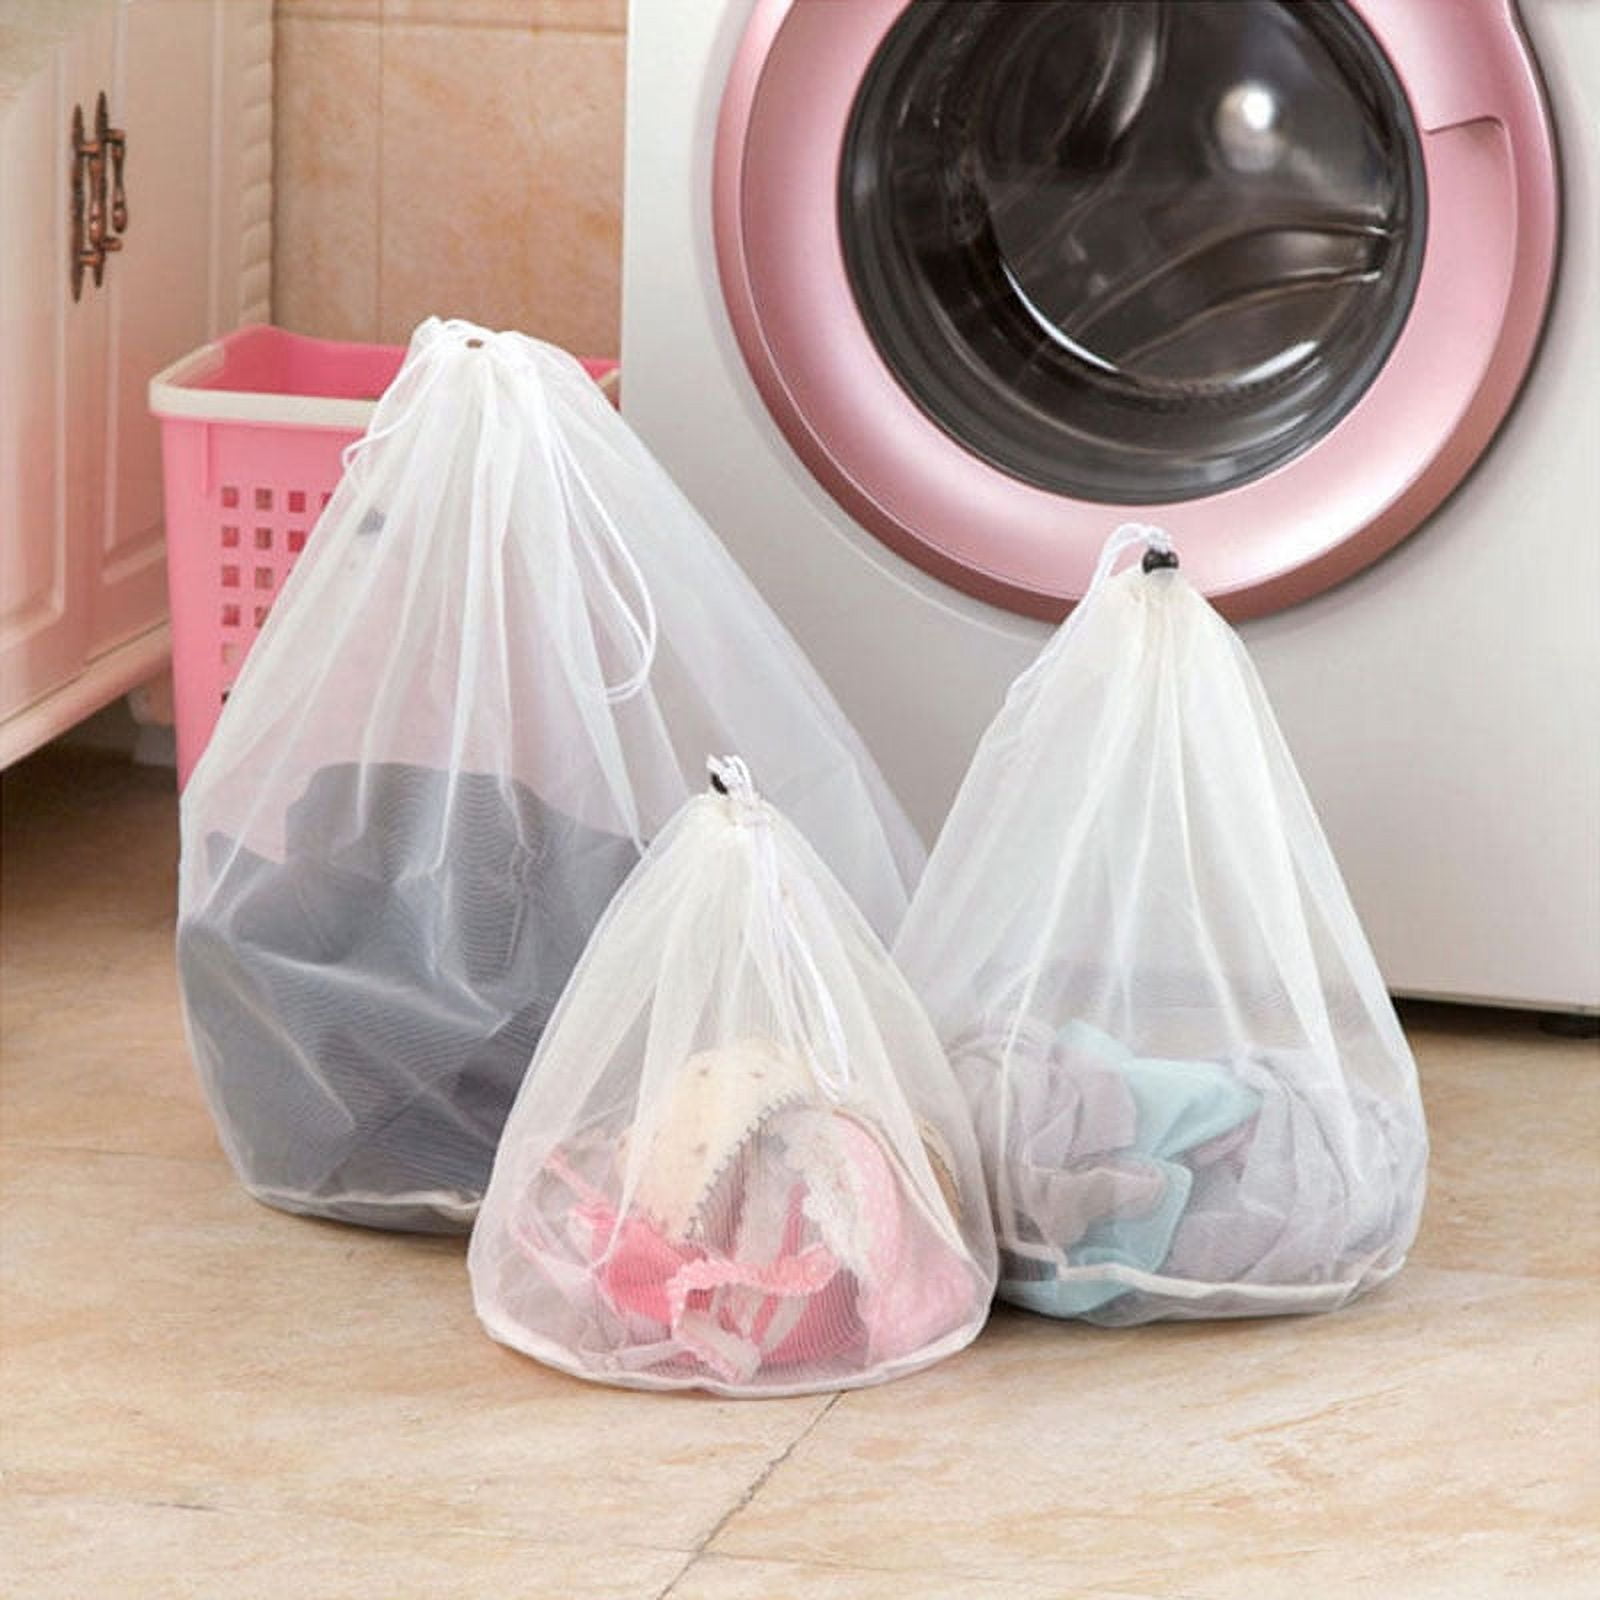 Washing Machine Bags for Laundry Bra Socks Dirty Clothes Mesh Bag Travel  Laundry Bag Set - Price history & Review, AliExpress Seller - Meltsethome  Store